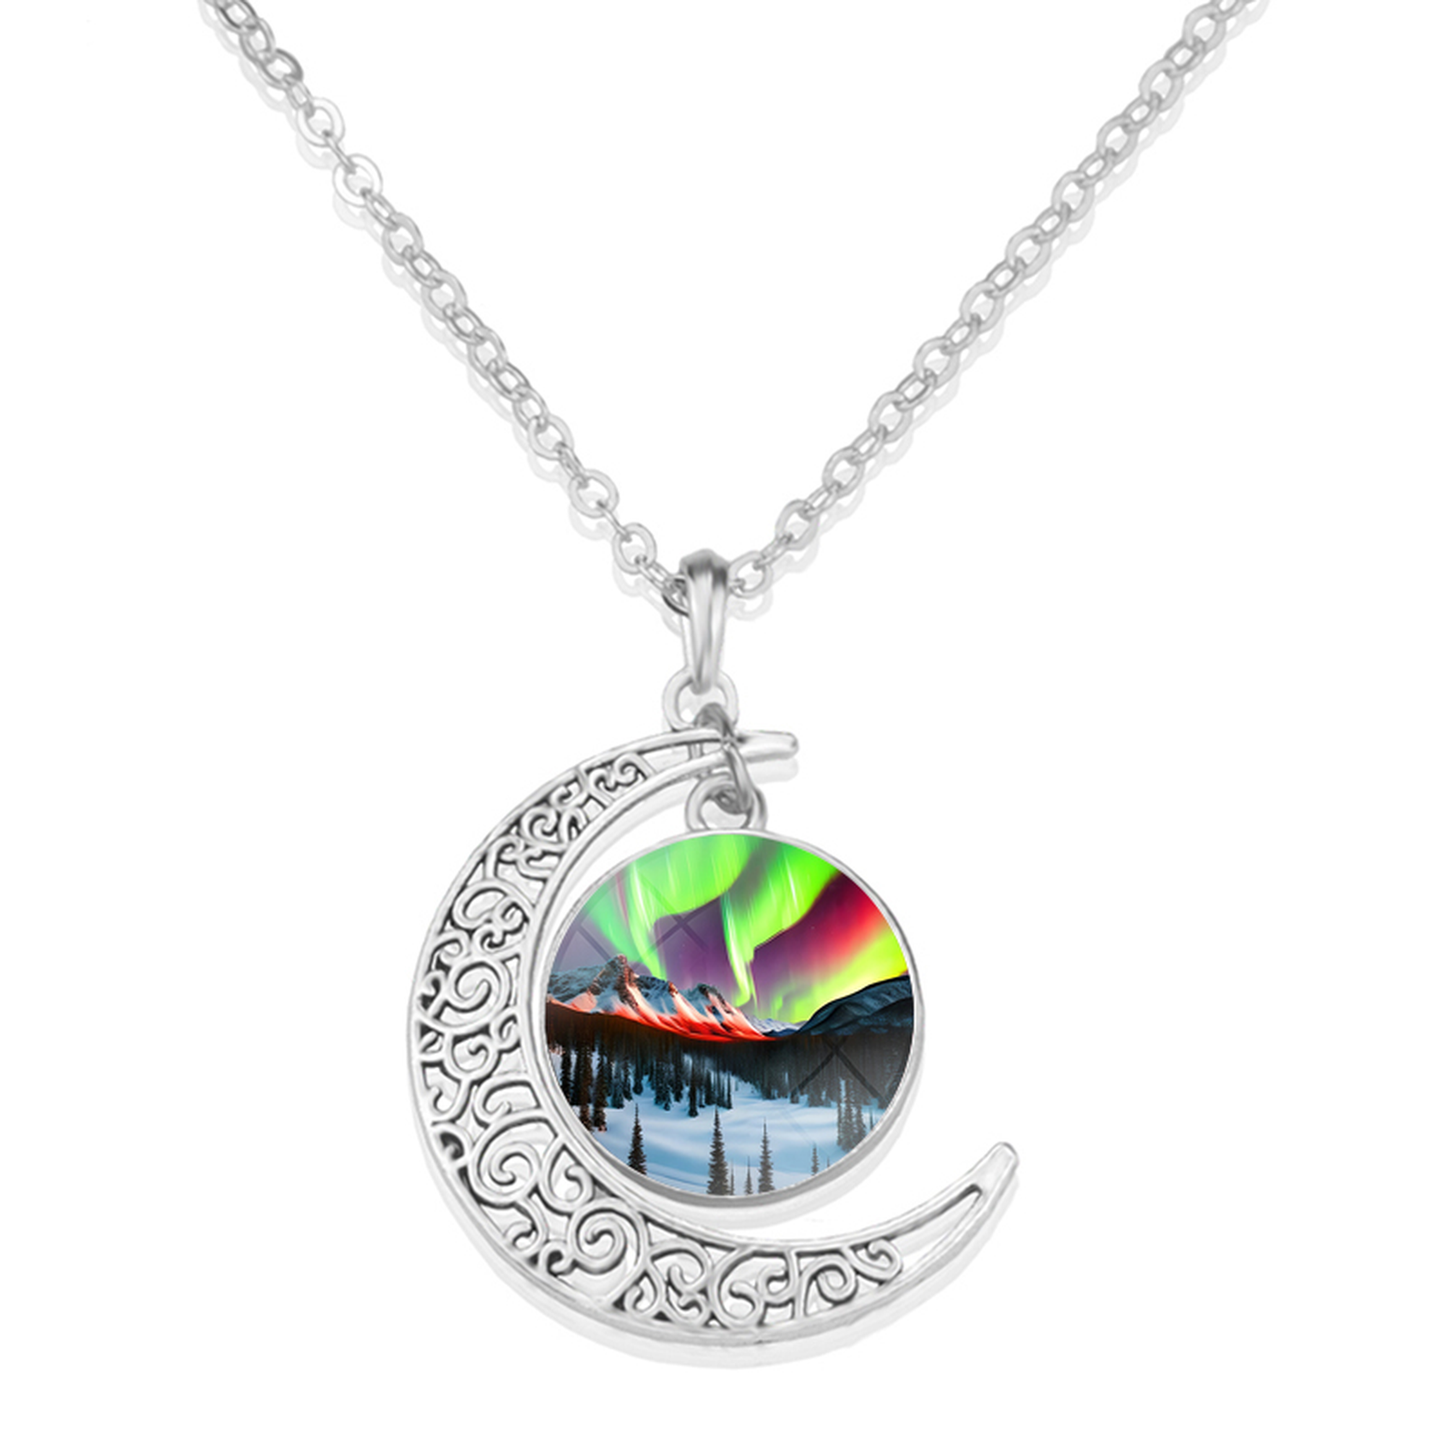 Unique Aurora Borealis Crescent Necklace - Northern Light Jewelry - Crescent Glass Cabochon Pendent Necklace - Perfect Aurora Lovers Gift 9